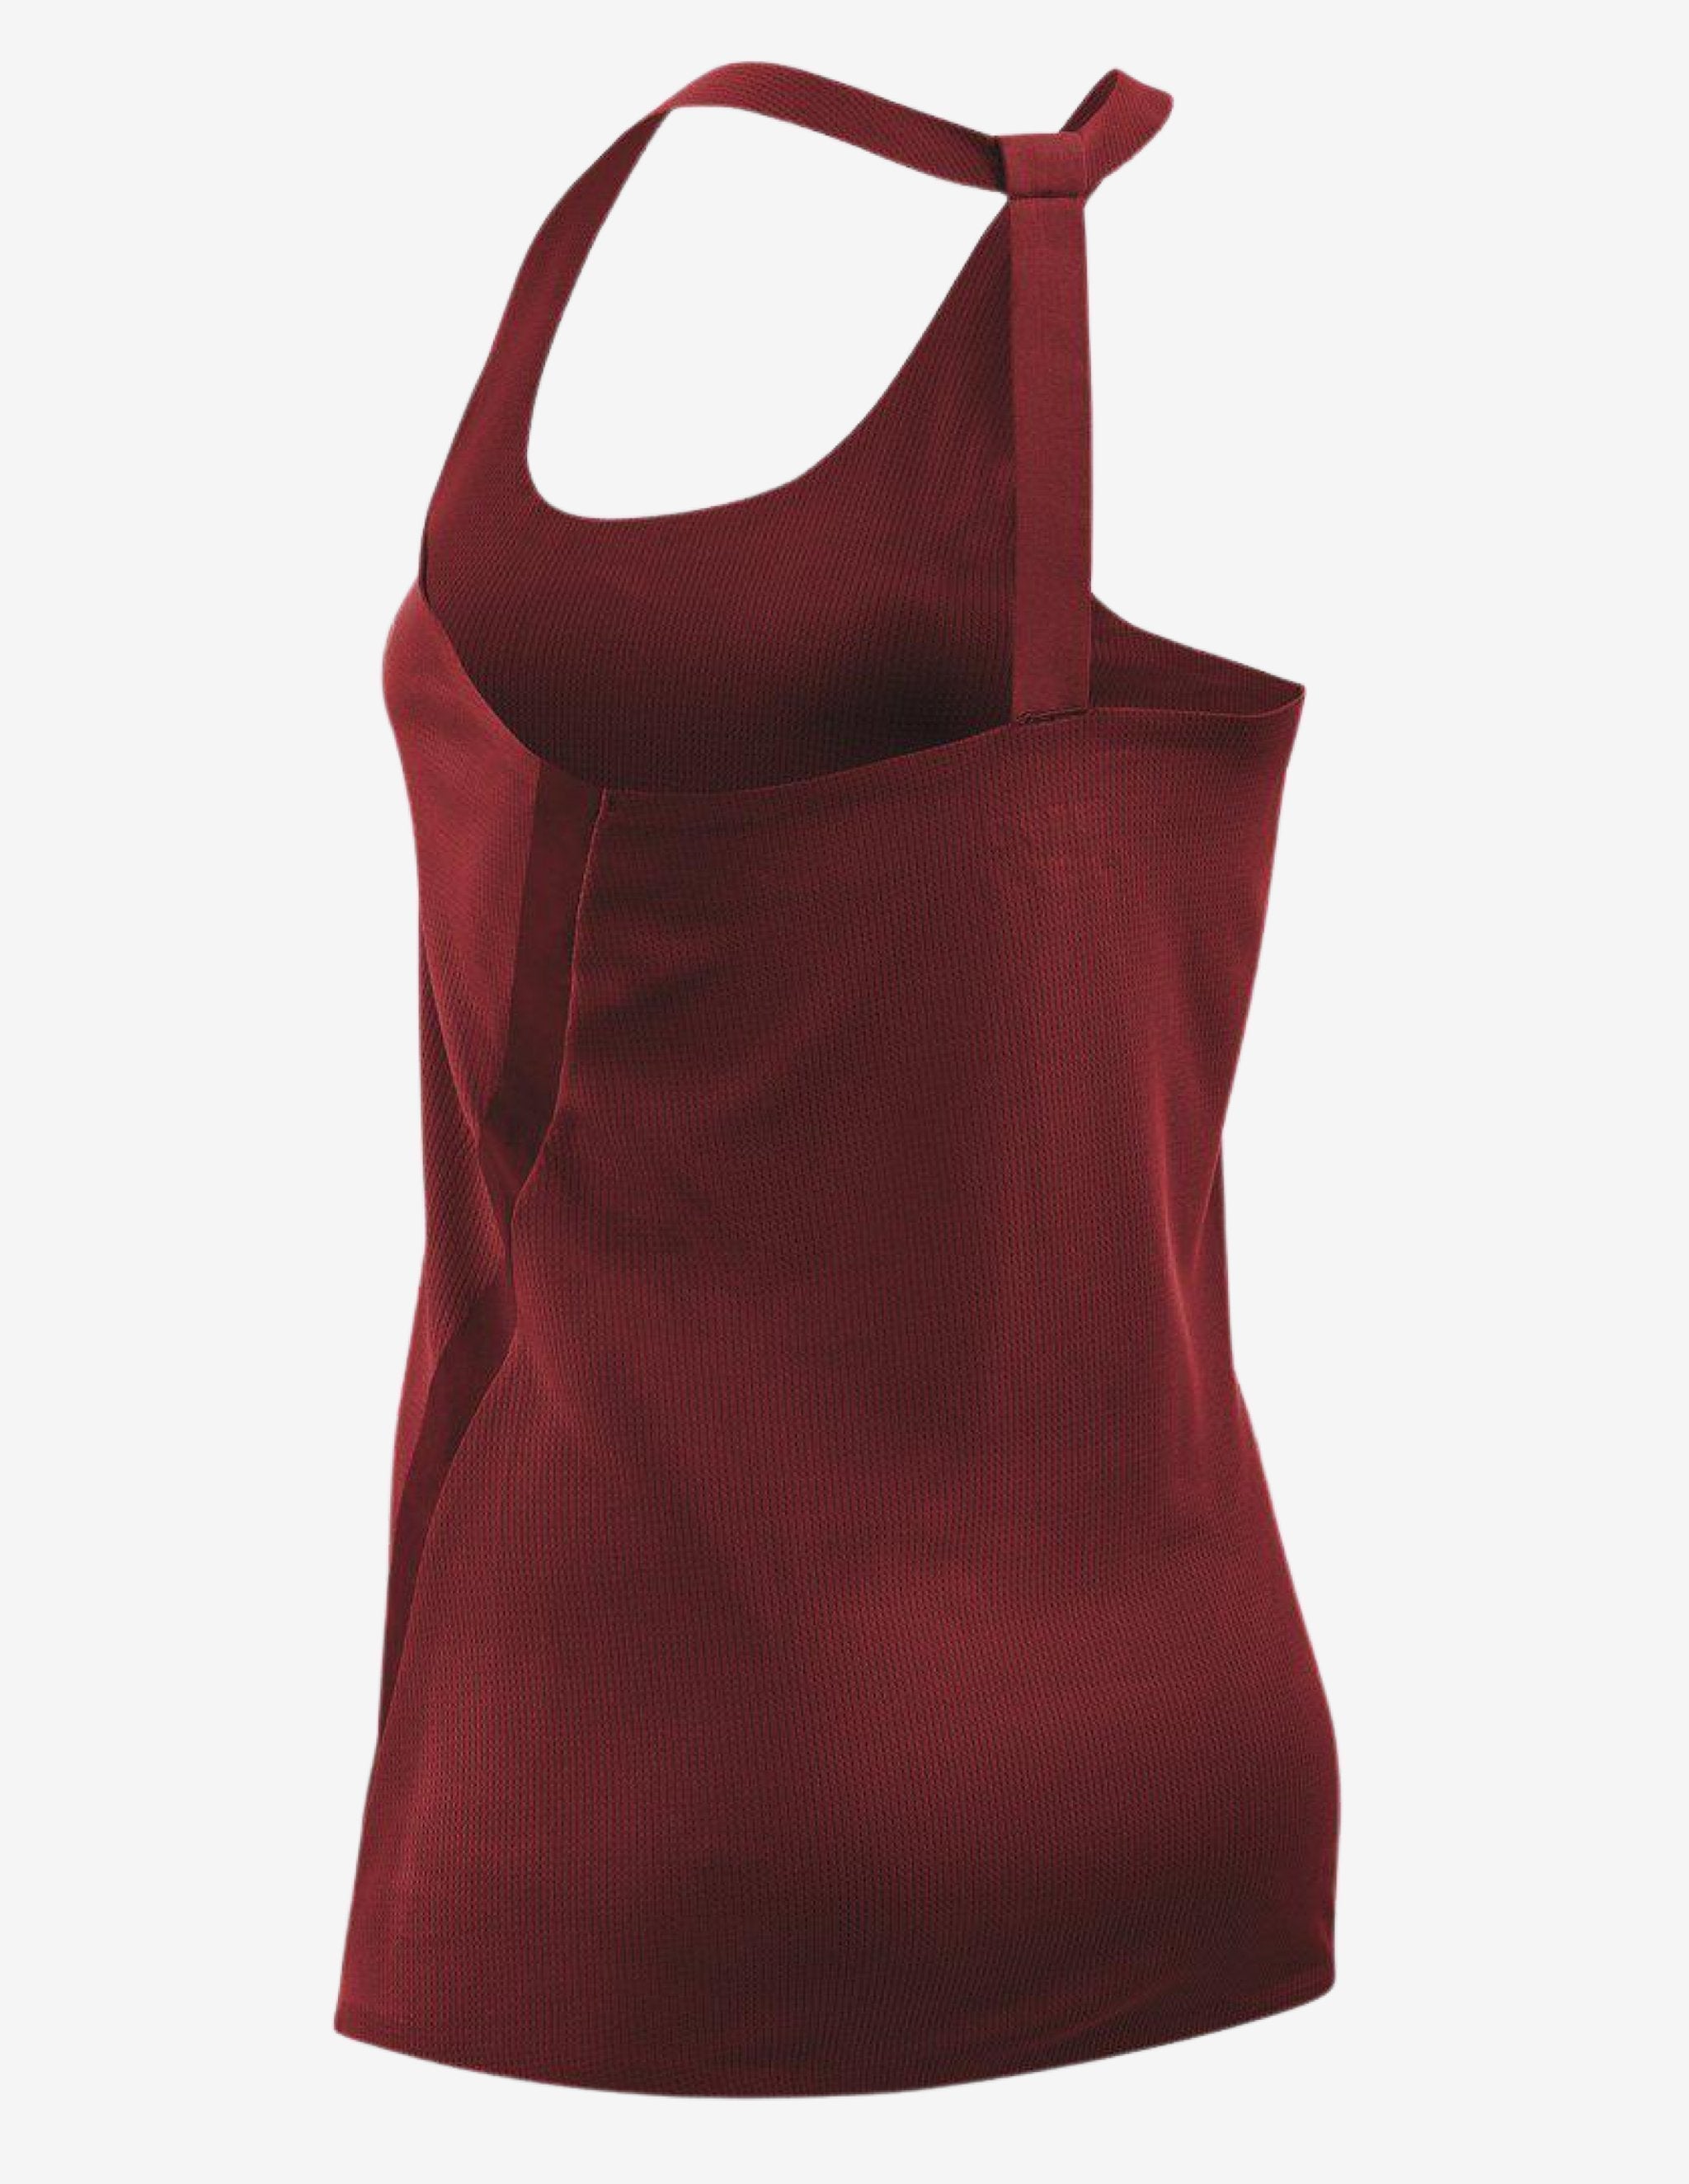 CEP Womens Training Tank Top Cherry Red-Tank Woman-CEP Compression-Guru Muscle